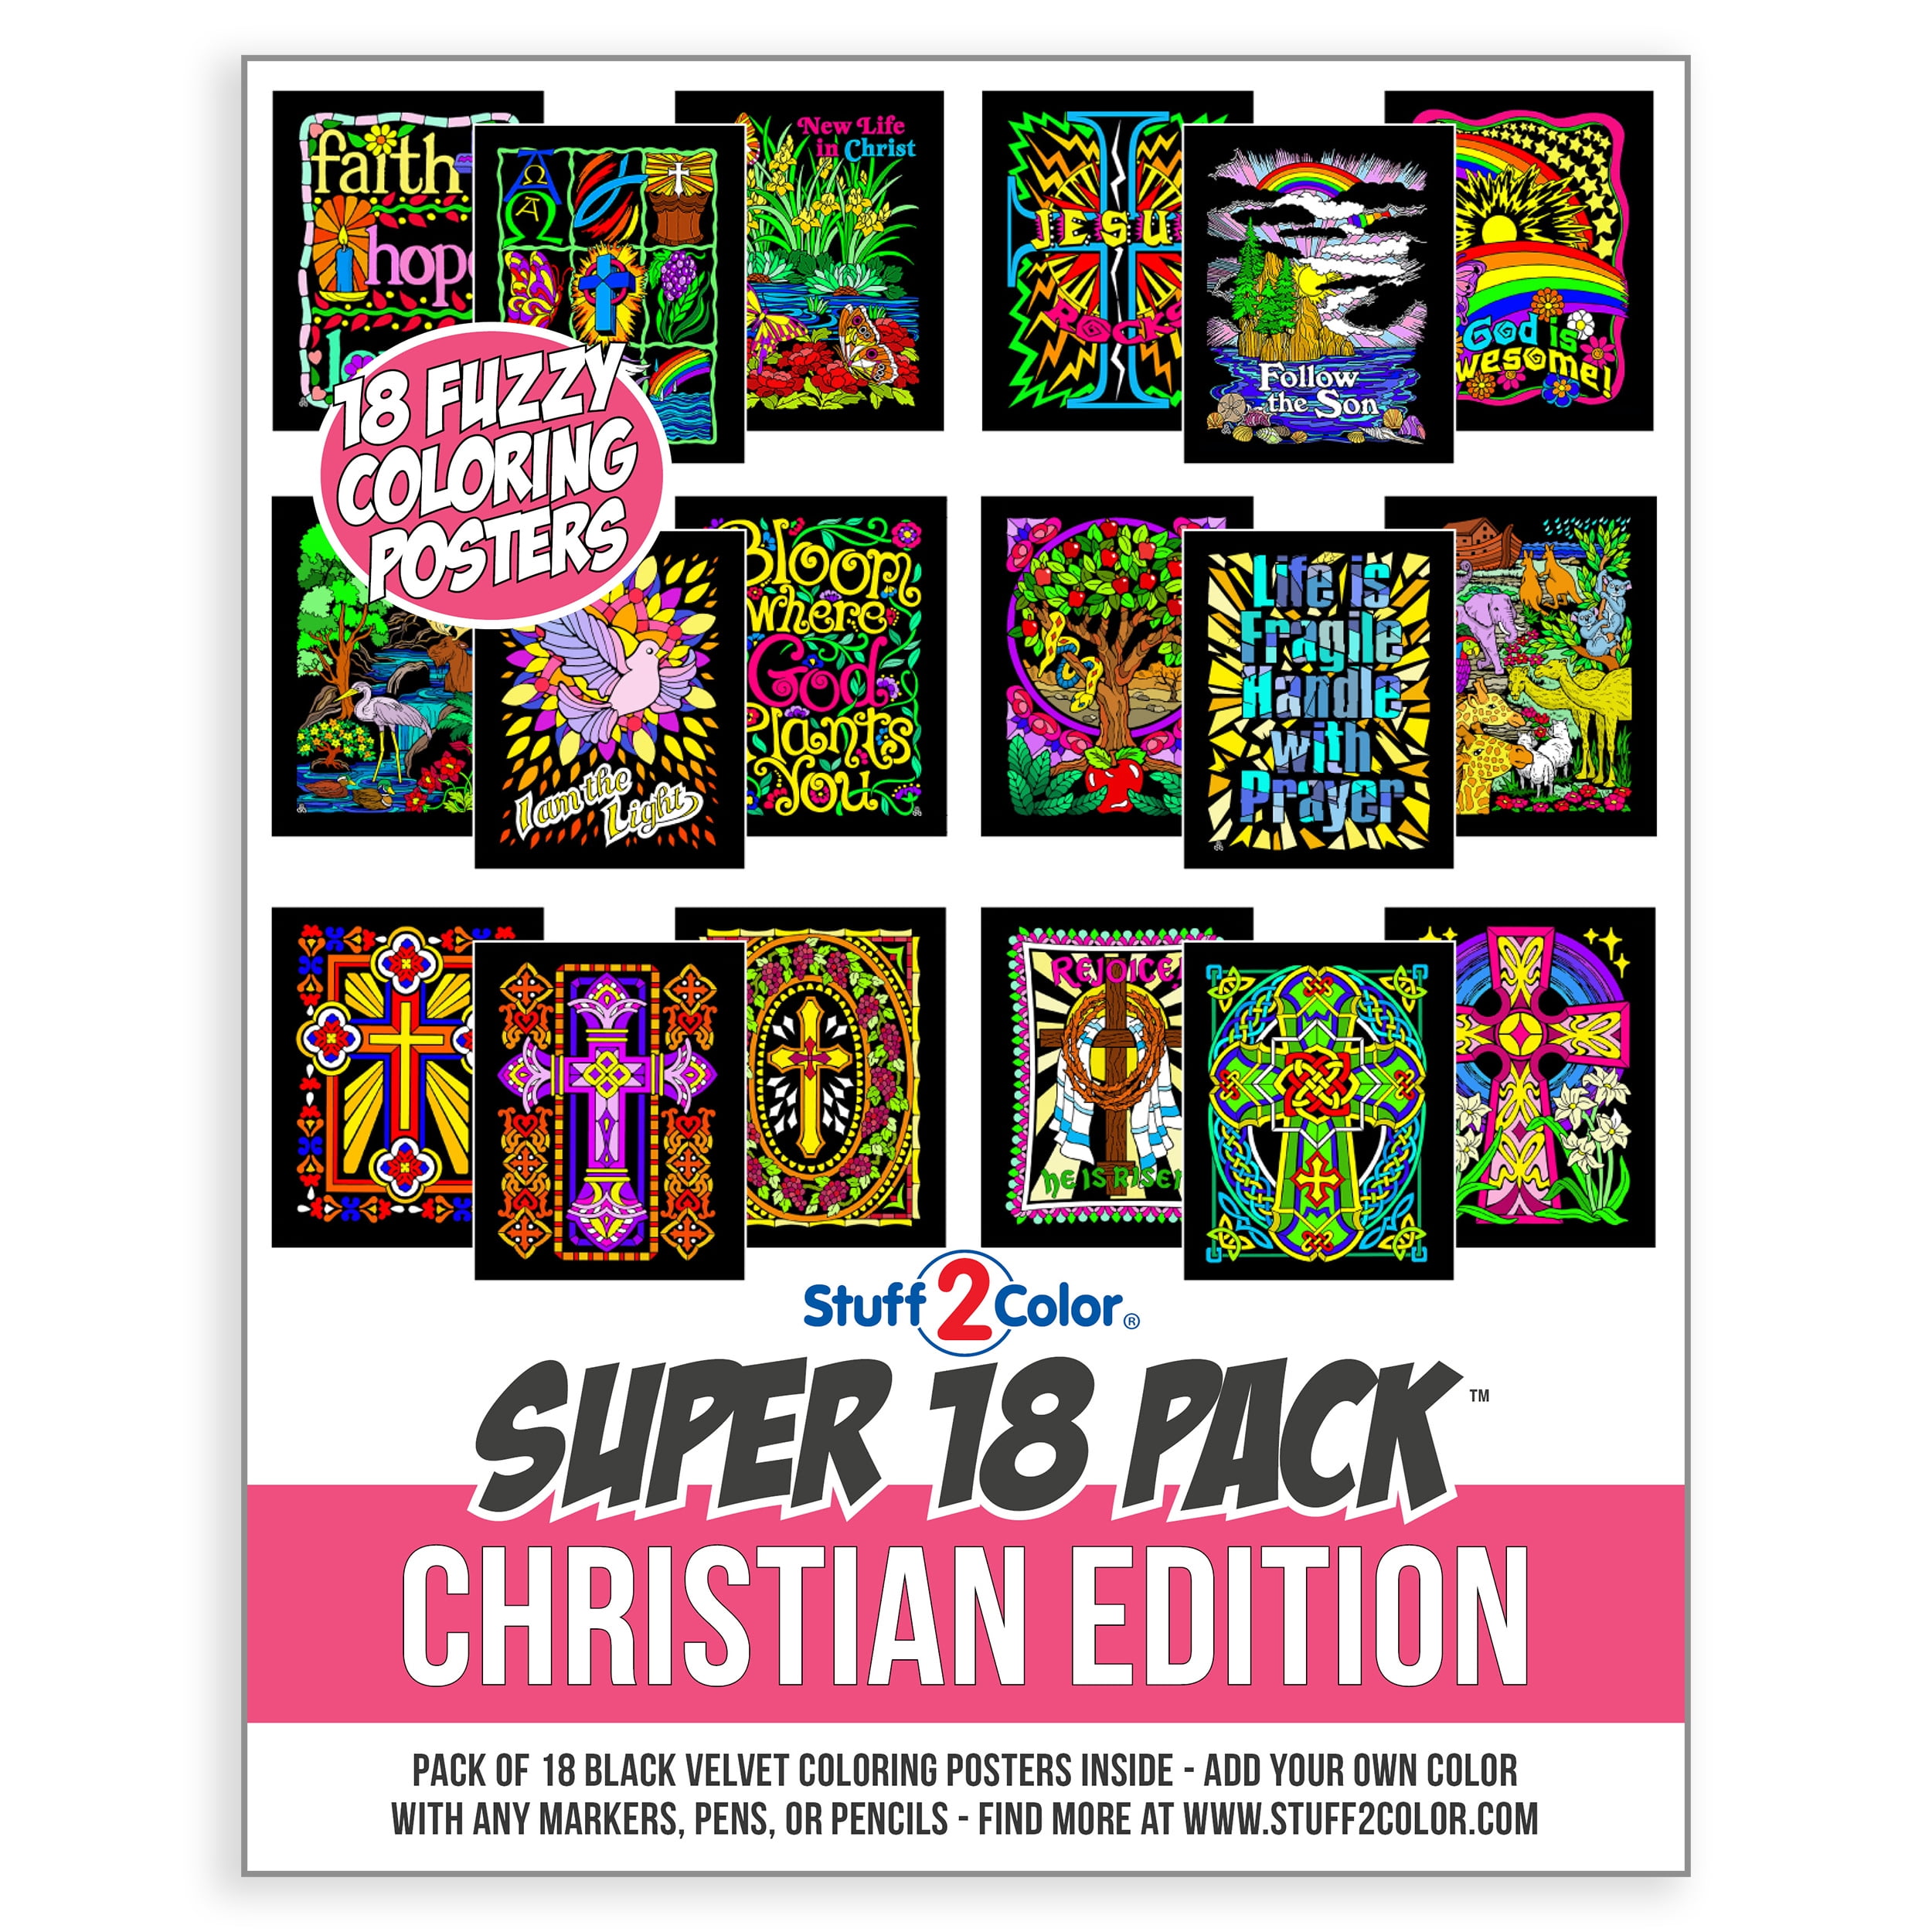 Super Pack of 18 Fuzzy Velvet Coloring Posters (Christian Edition) -  Stuff2Color 